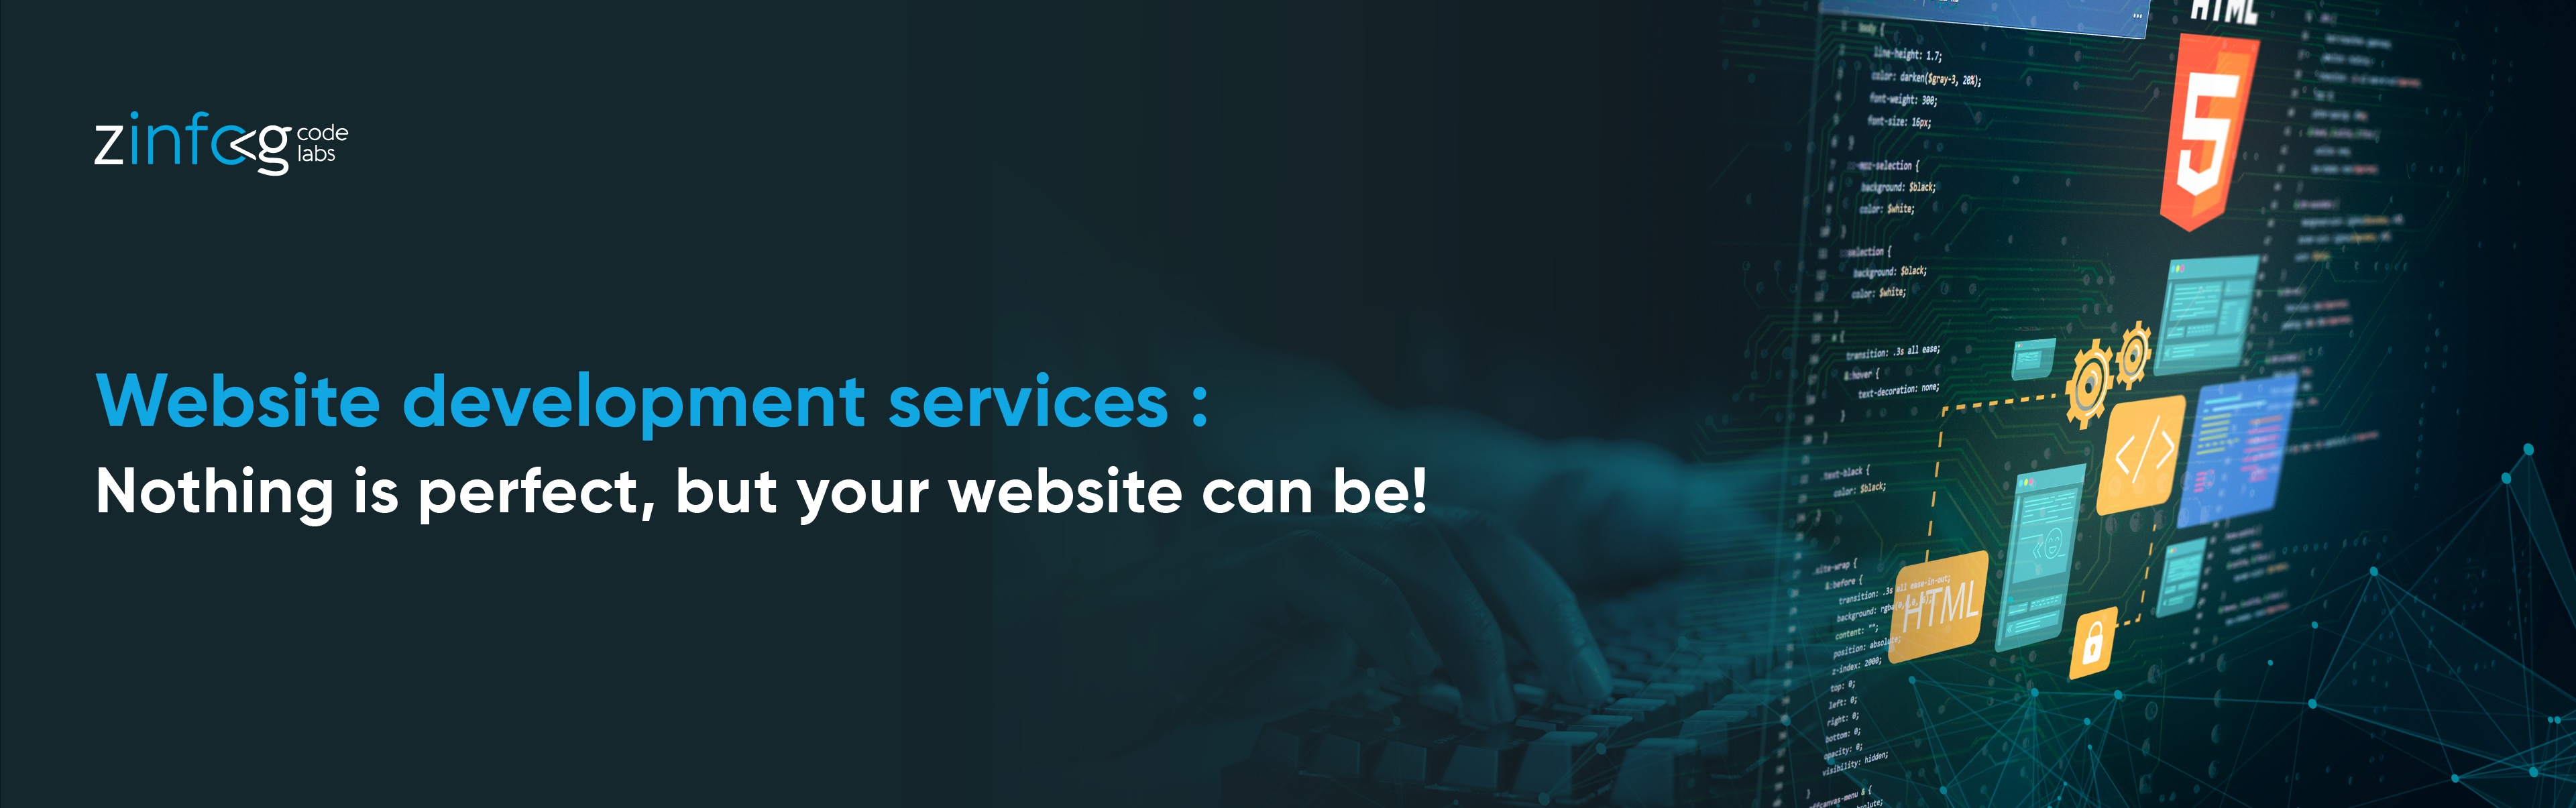 website-development-services-nothing-is-perfect-but-your-website-can-be.html